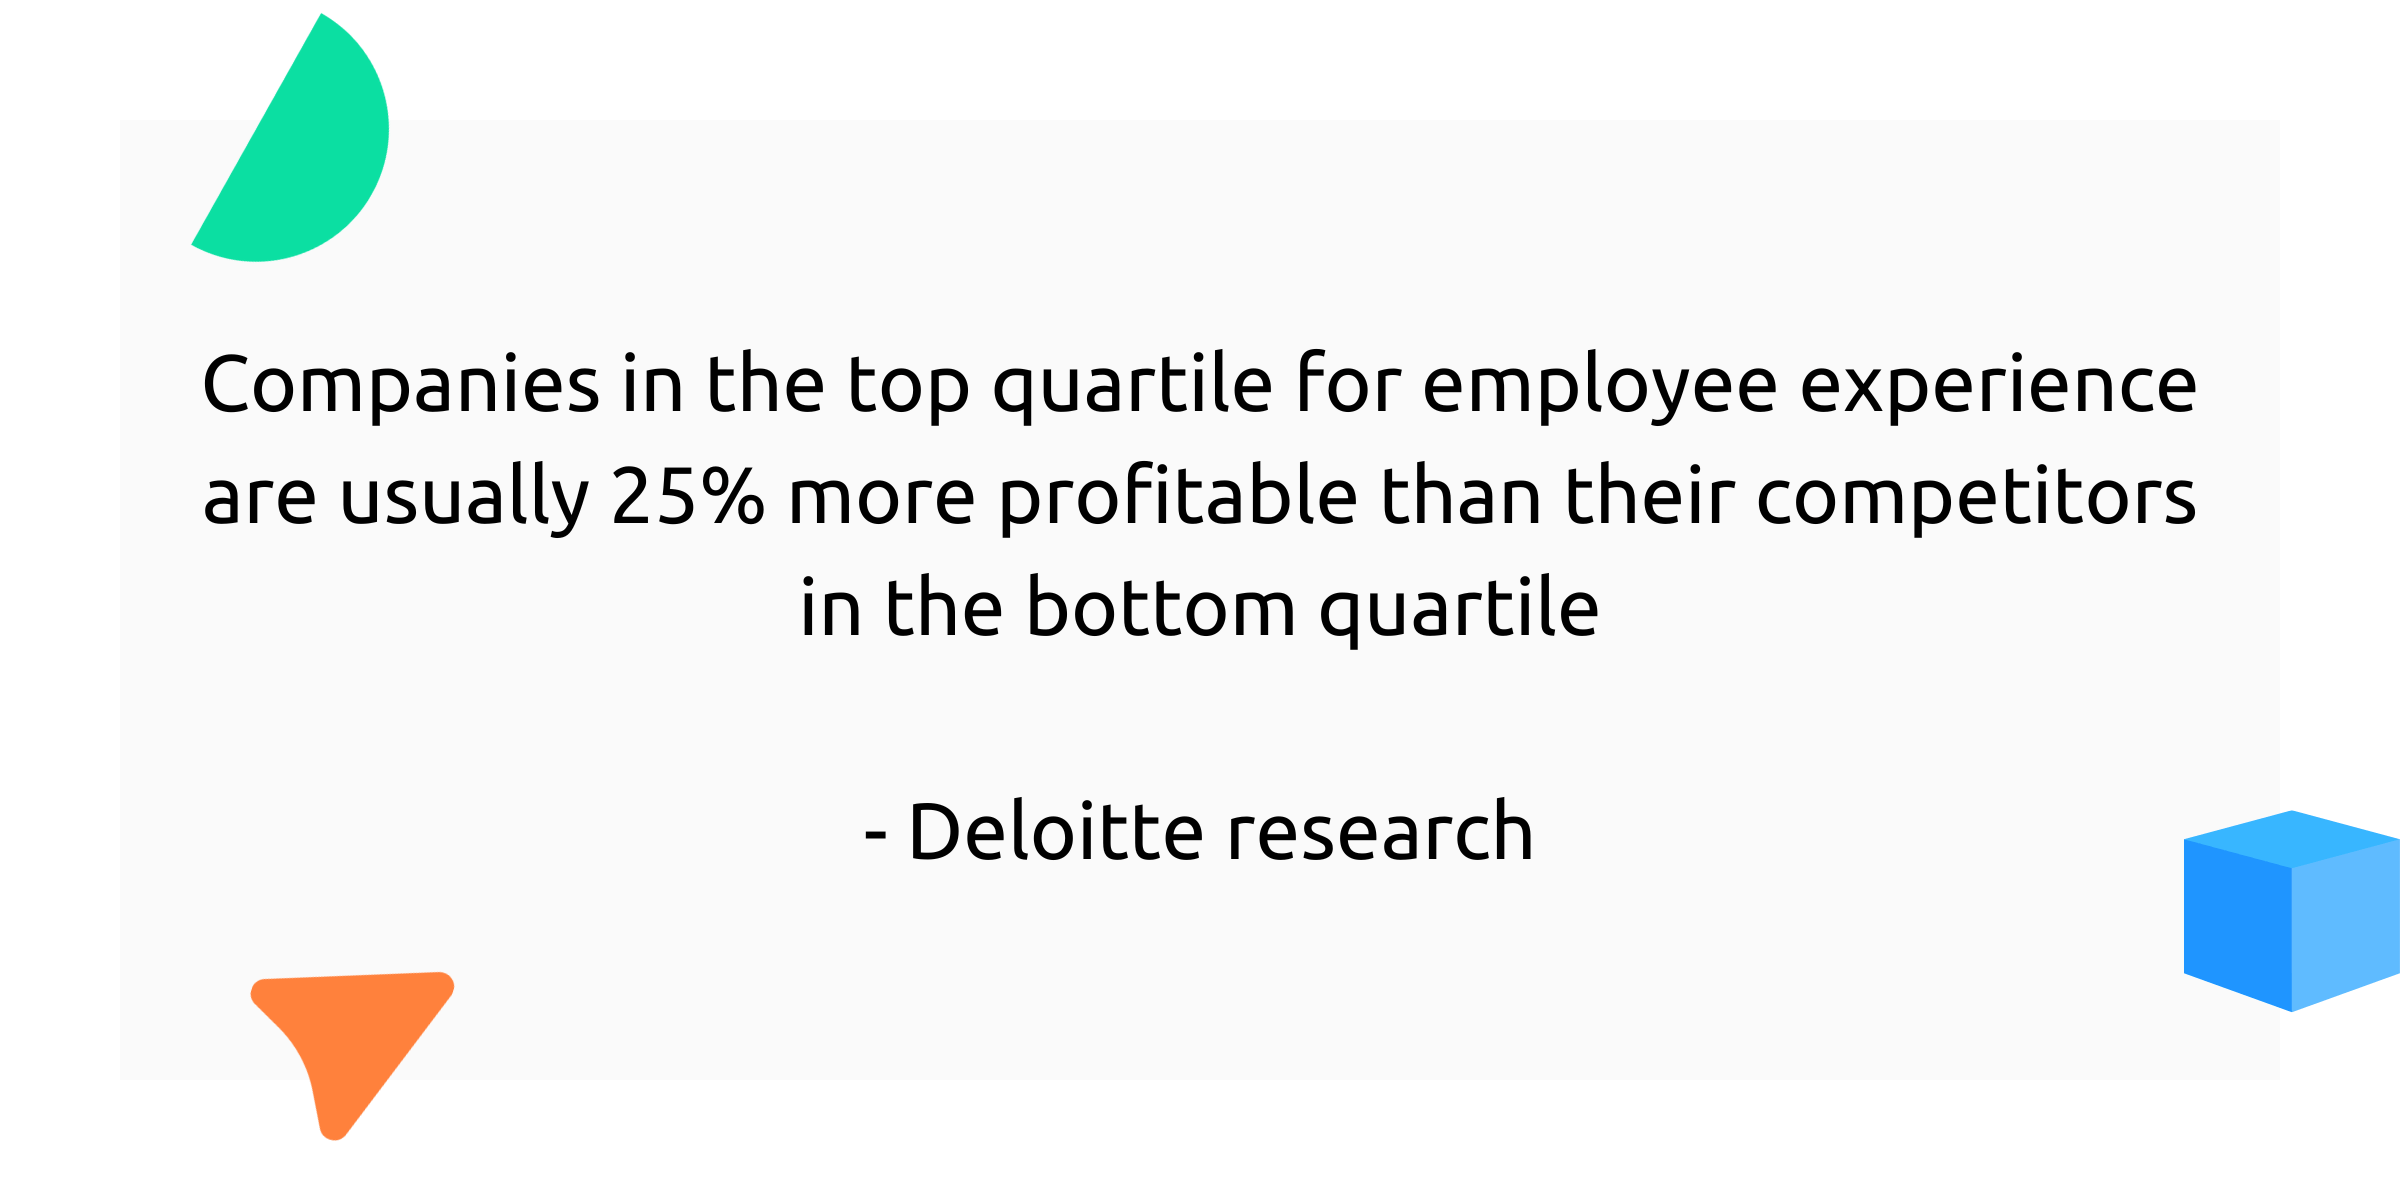 Companies in the top quartile for employee experience are usually 25% more profitable than their competitors in the bottom quartile- Deloitte research